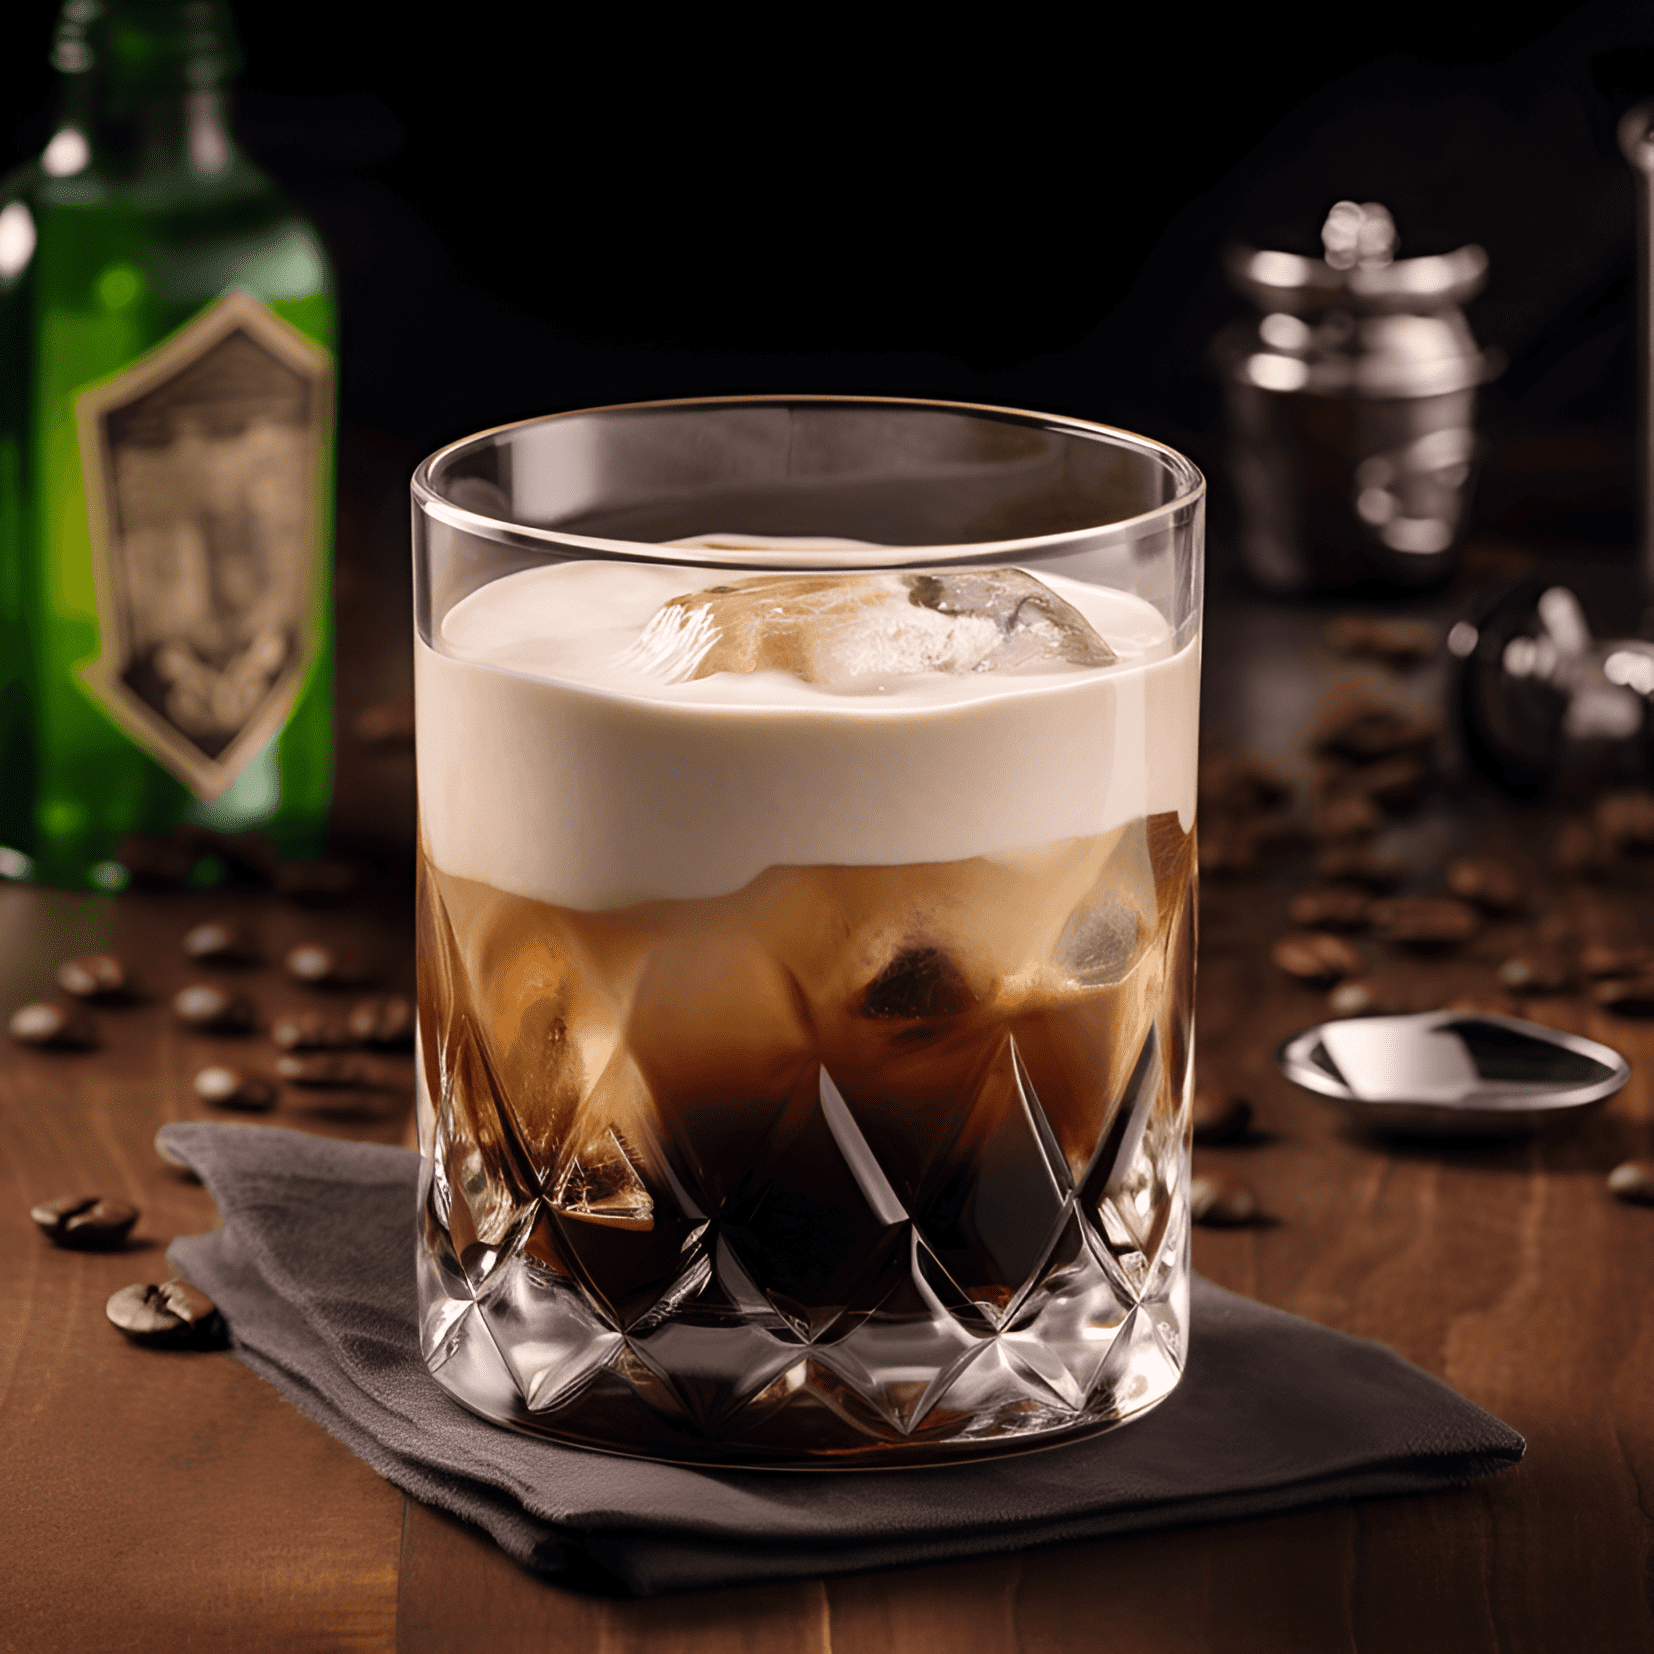 Smith and Wesson Cocktail Recipe - The Smith and Wesson cocktail has a rich, creamy texture with a strong coffee flavor, followed by a subtle sweetness from the Irish cream. The vodka adds a bit of a kick, making it a well-balanced and satisfying drink.